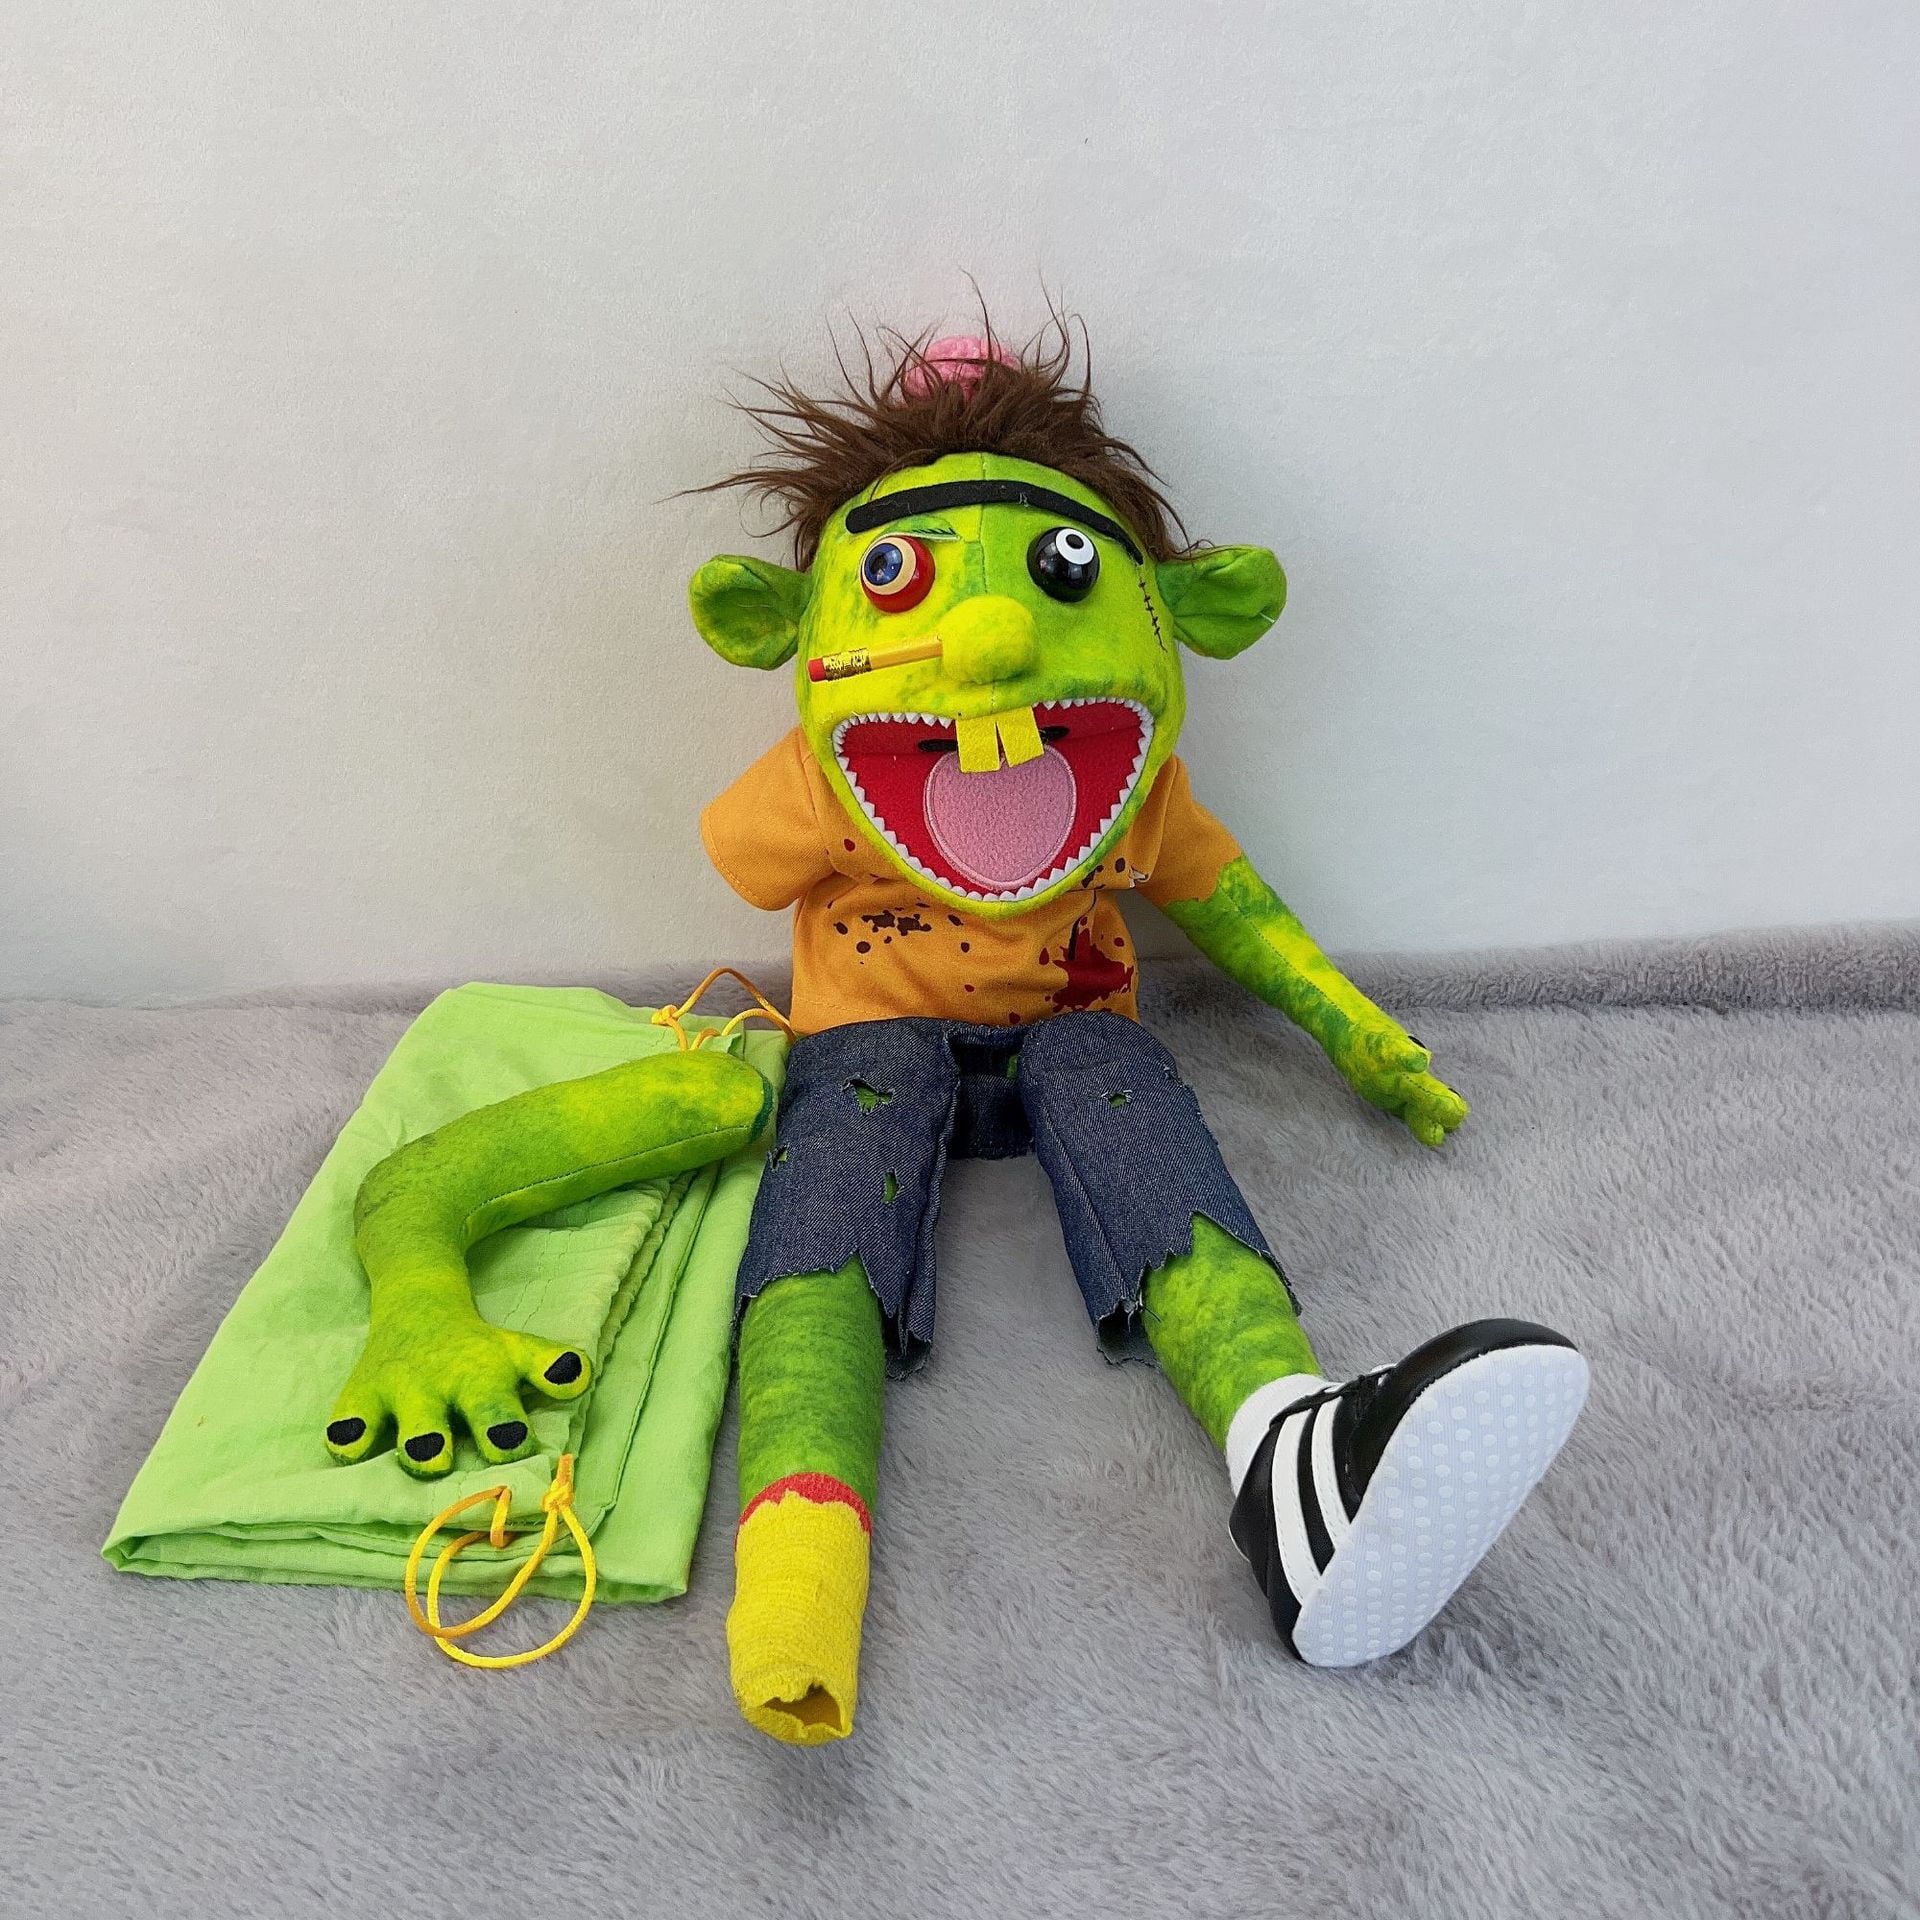 Jeffy Plush Puppet Toy, Fun Soft Prank Show Hand Puppet with